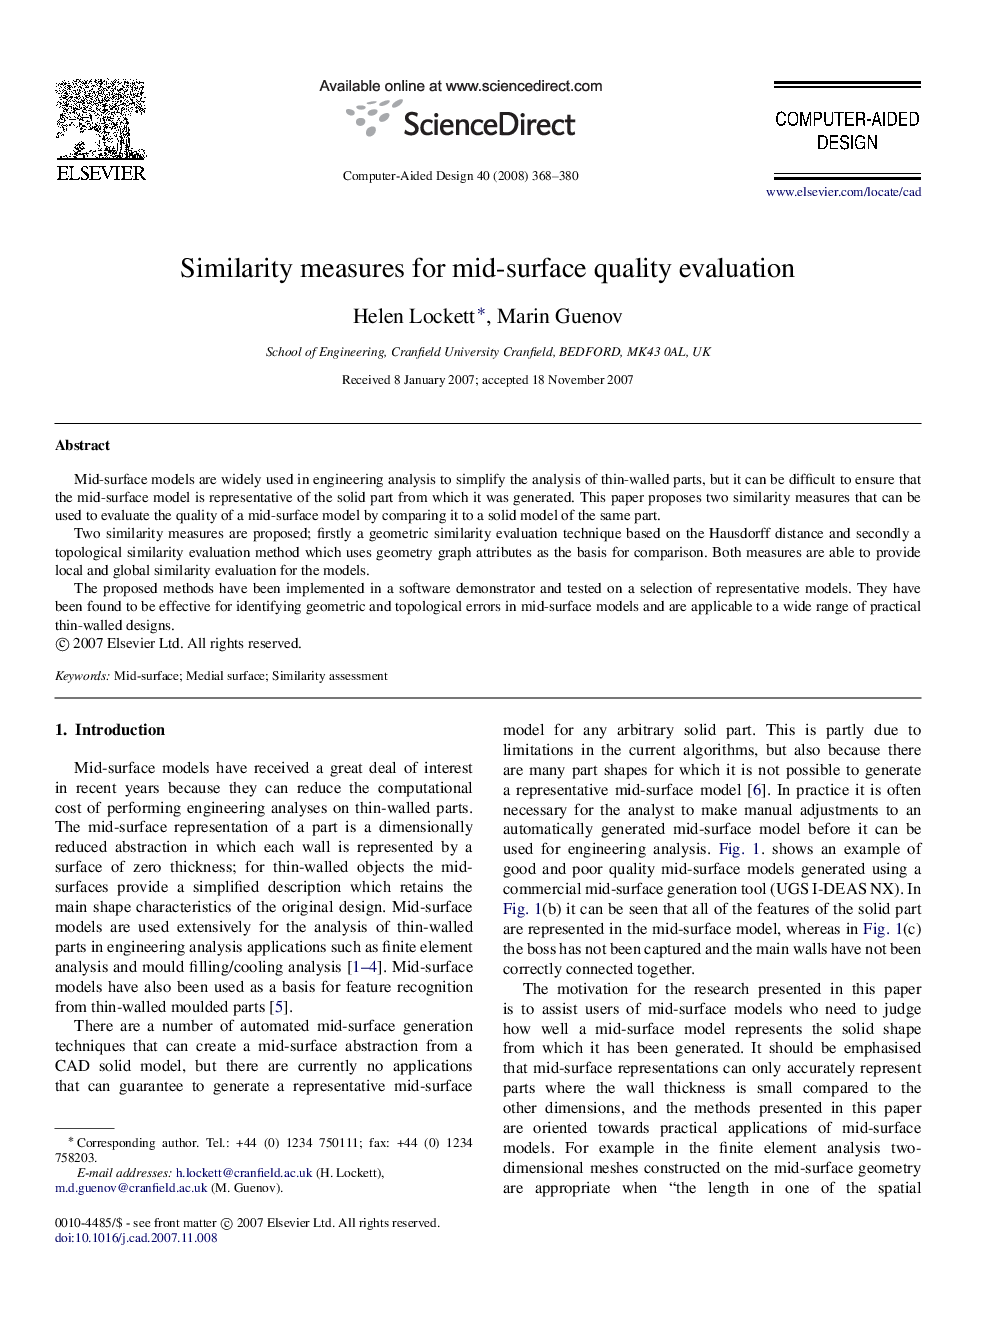 Similarity measures for mid-surface quality evaluation